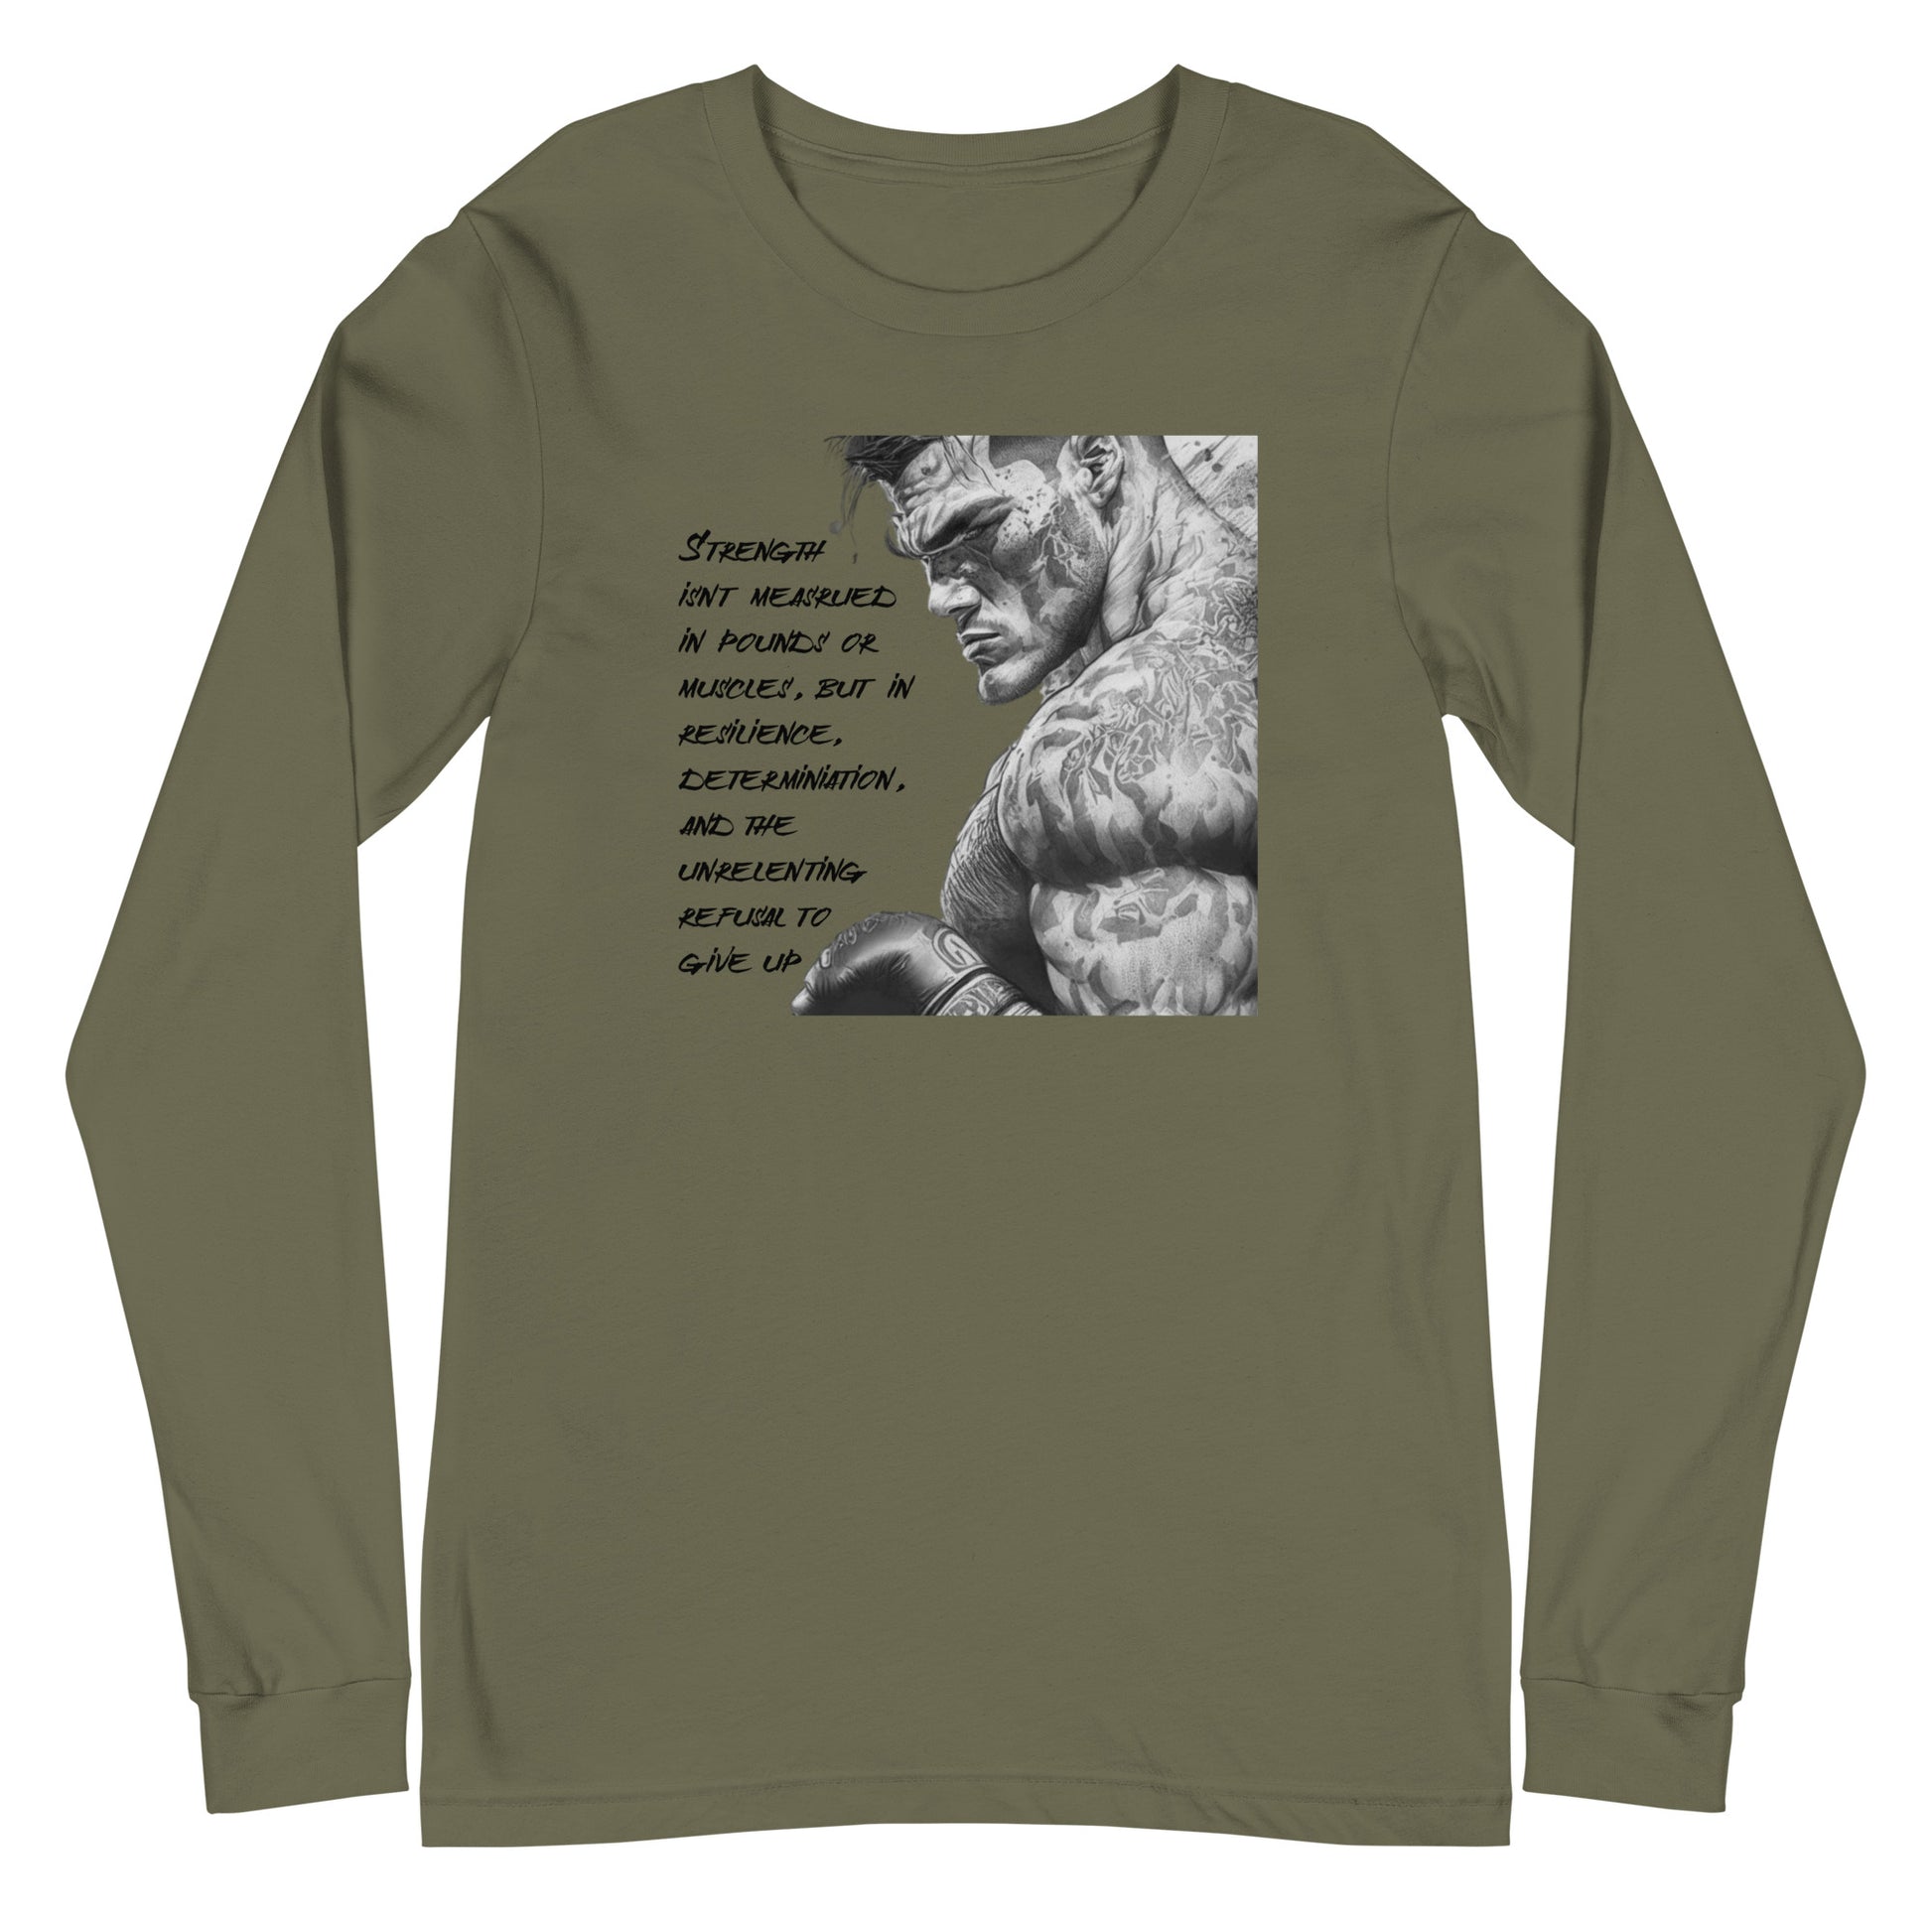 Strength and Determination Men's Long Sleeve Tee Military Green